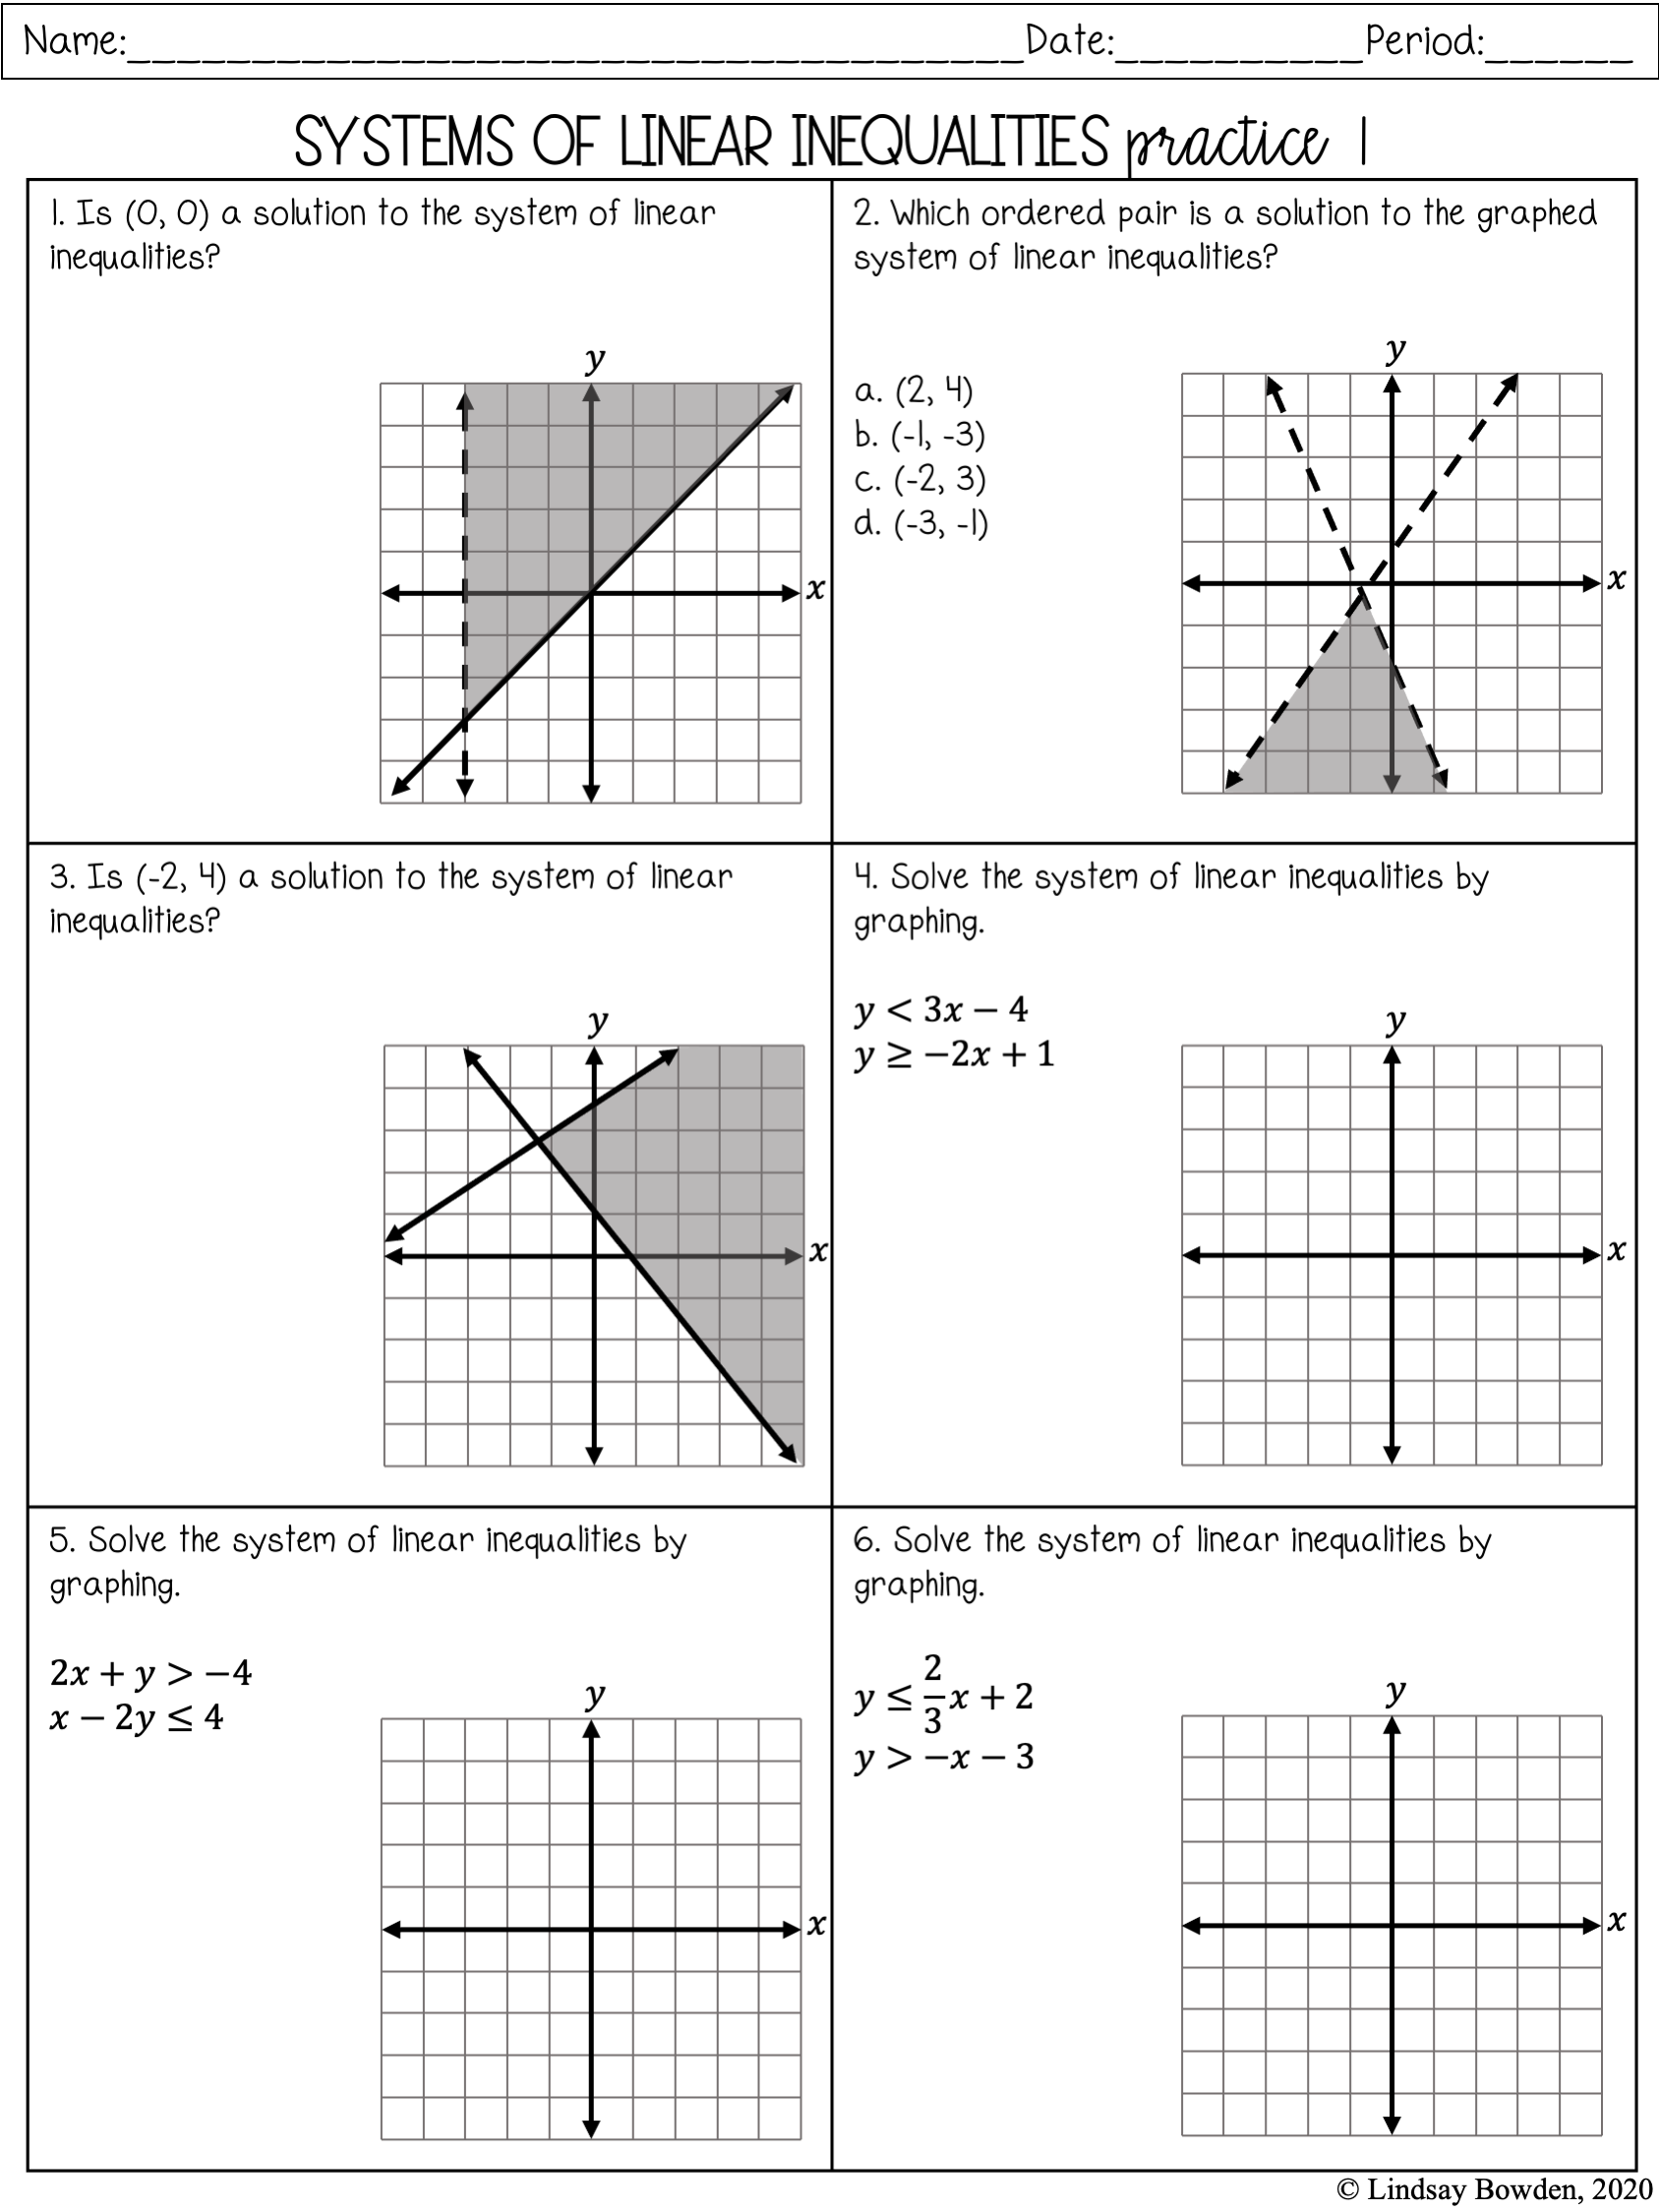 Linear Systems Notes and Worksheets - Lindsay Bowden Regarding Systems Of Linear Inequalities Worksheet